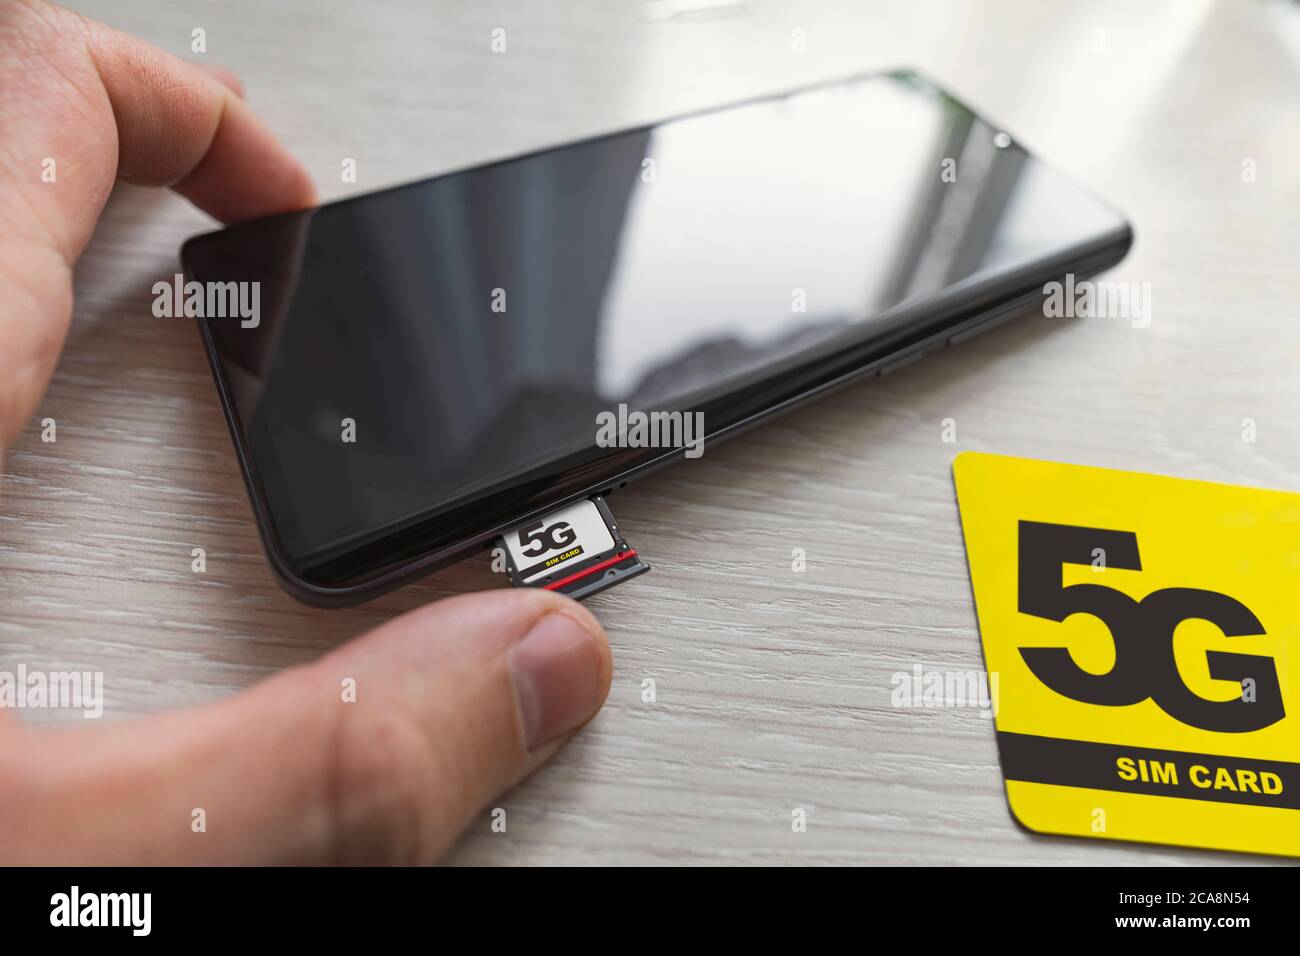 Replacing 4G SIM card with a high speed 5g SIM card close up on the store's wooden table Stock Photo